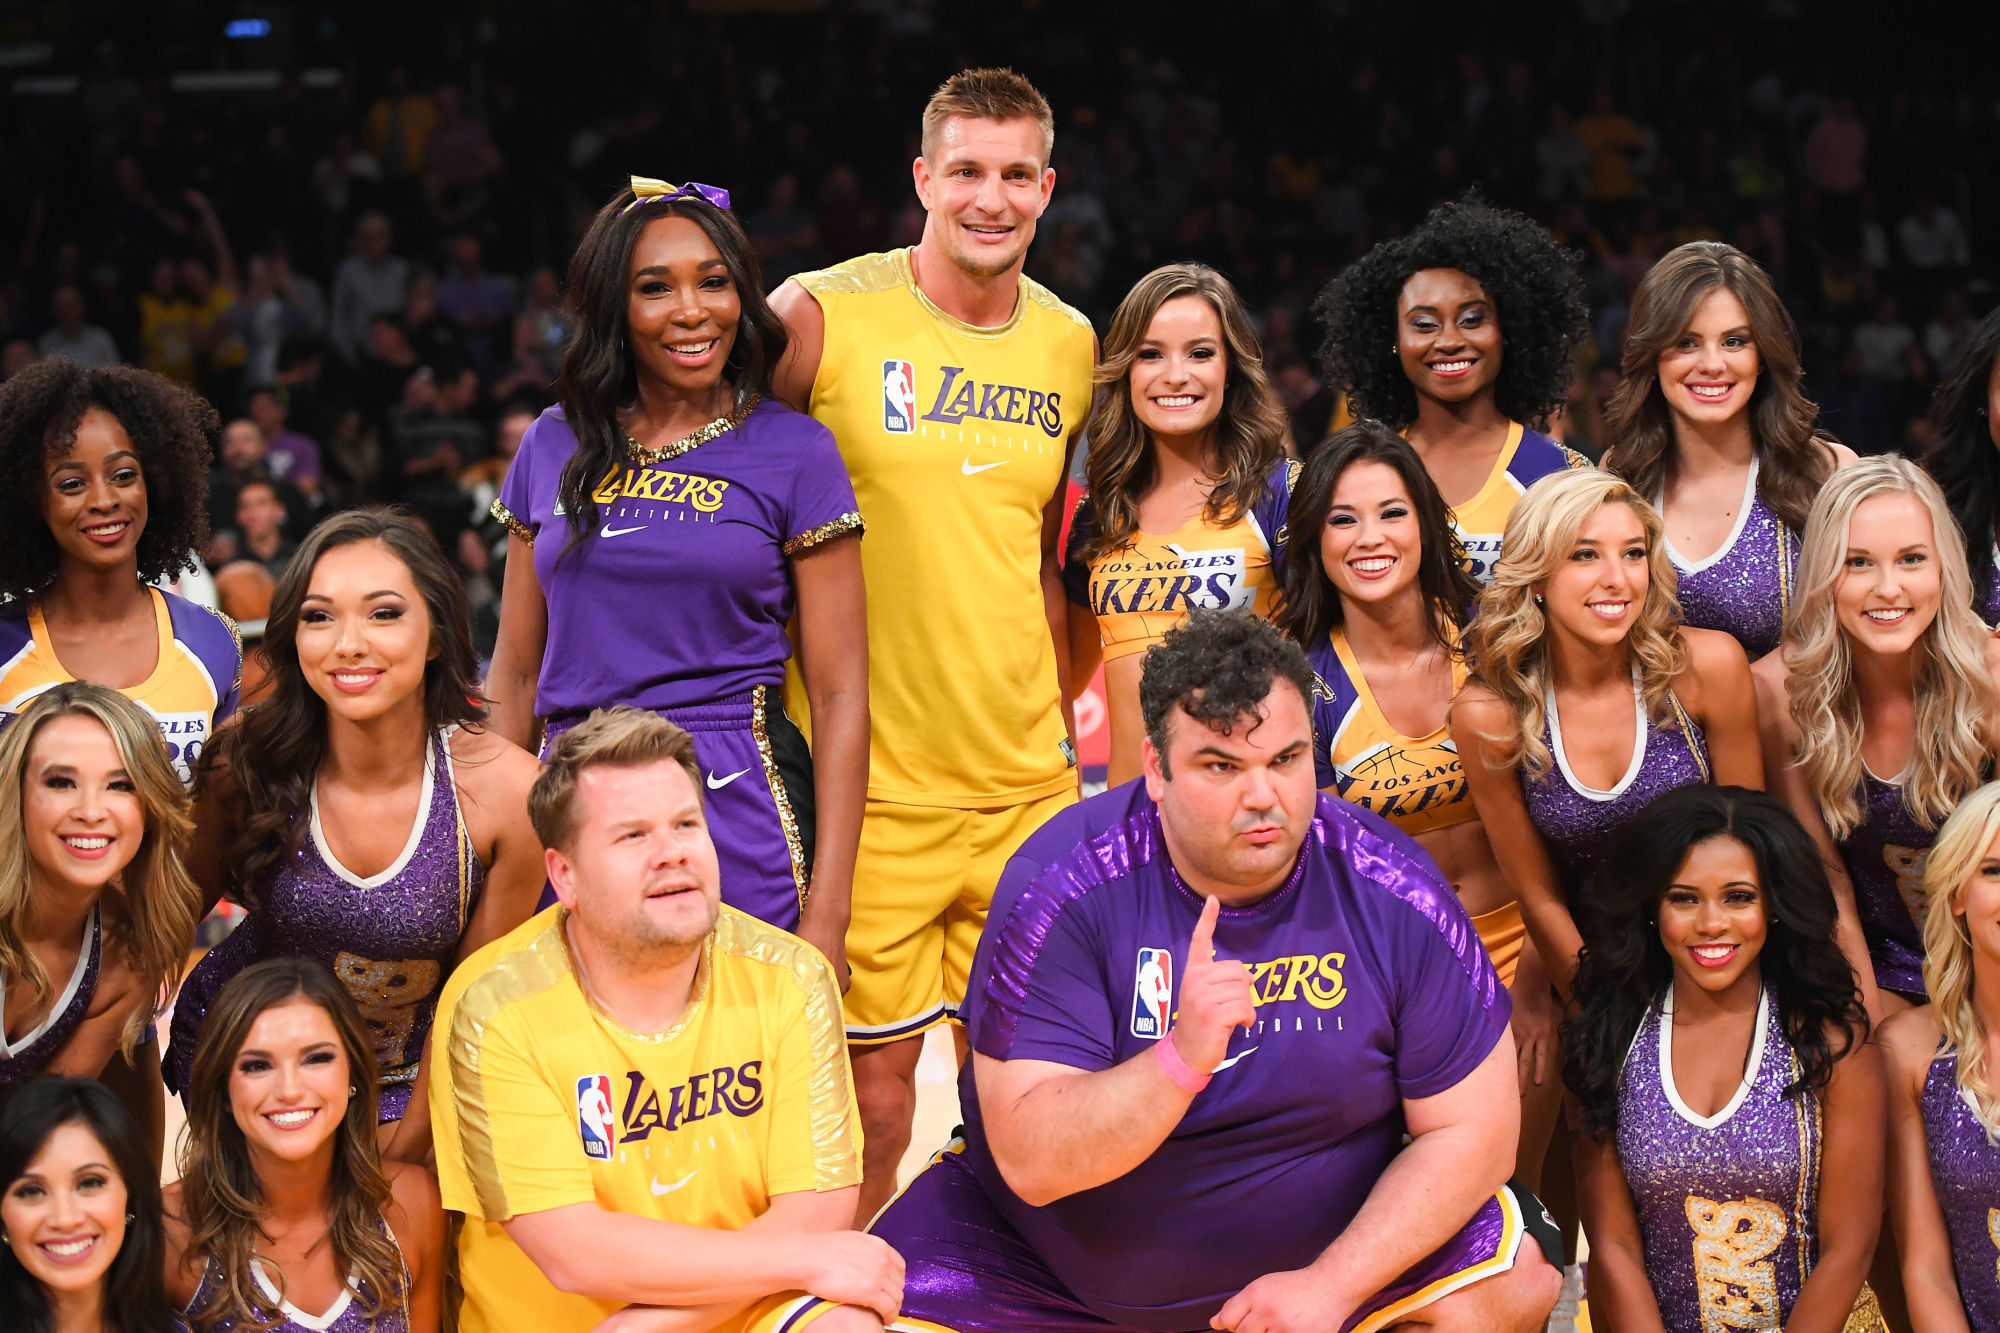 Nov 19, 2019; Los Angeles, CA, USA; Tennis player Venus Williams, former NFL player Rob Gronkowski, comedians James Corden and Ian Karmel take a photo with the Los Angeles Lakers girls after dancing with them during halftime of the game against the Oklahoma City Thunder at Staples Center. Mandatory Credit: Jayne Kamin-Oncea-USA TODAY Sports/Sipa USA 

Photo by Icon Sport - Rob GRONKOWSKI - Venus WILLIAMS - James CORDEN - Ian KARMEL - Staples Center - Los Angeles (Etats Unis)